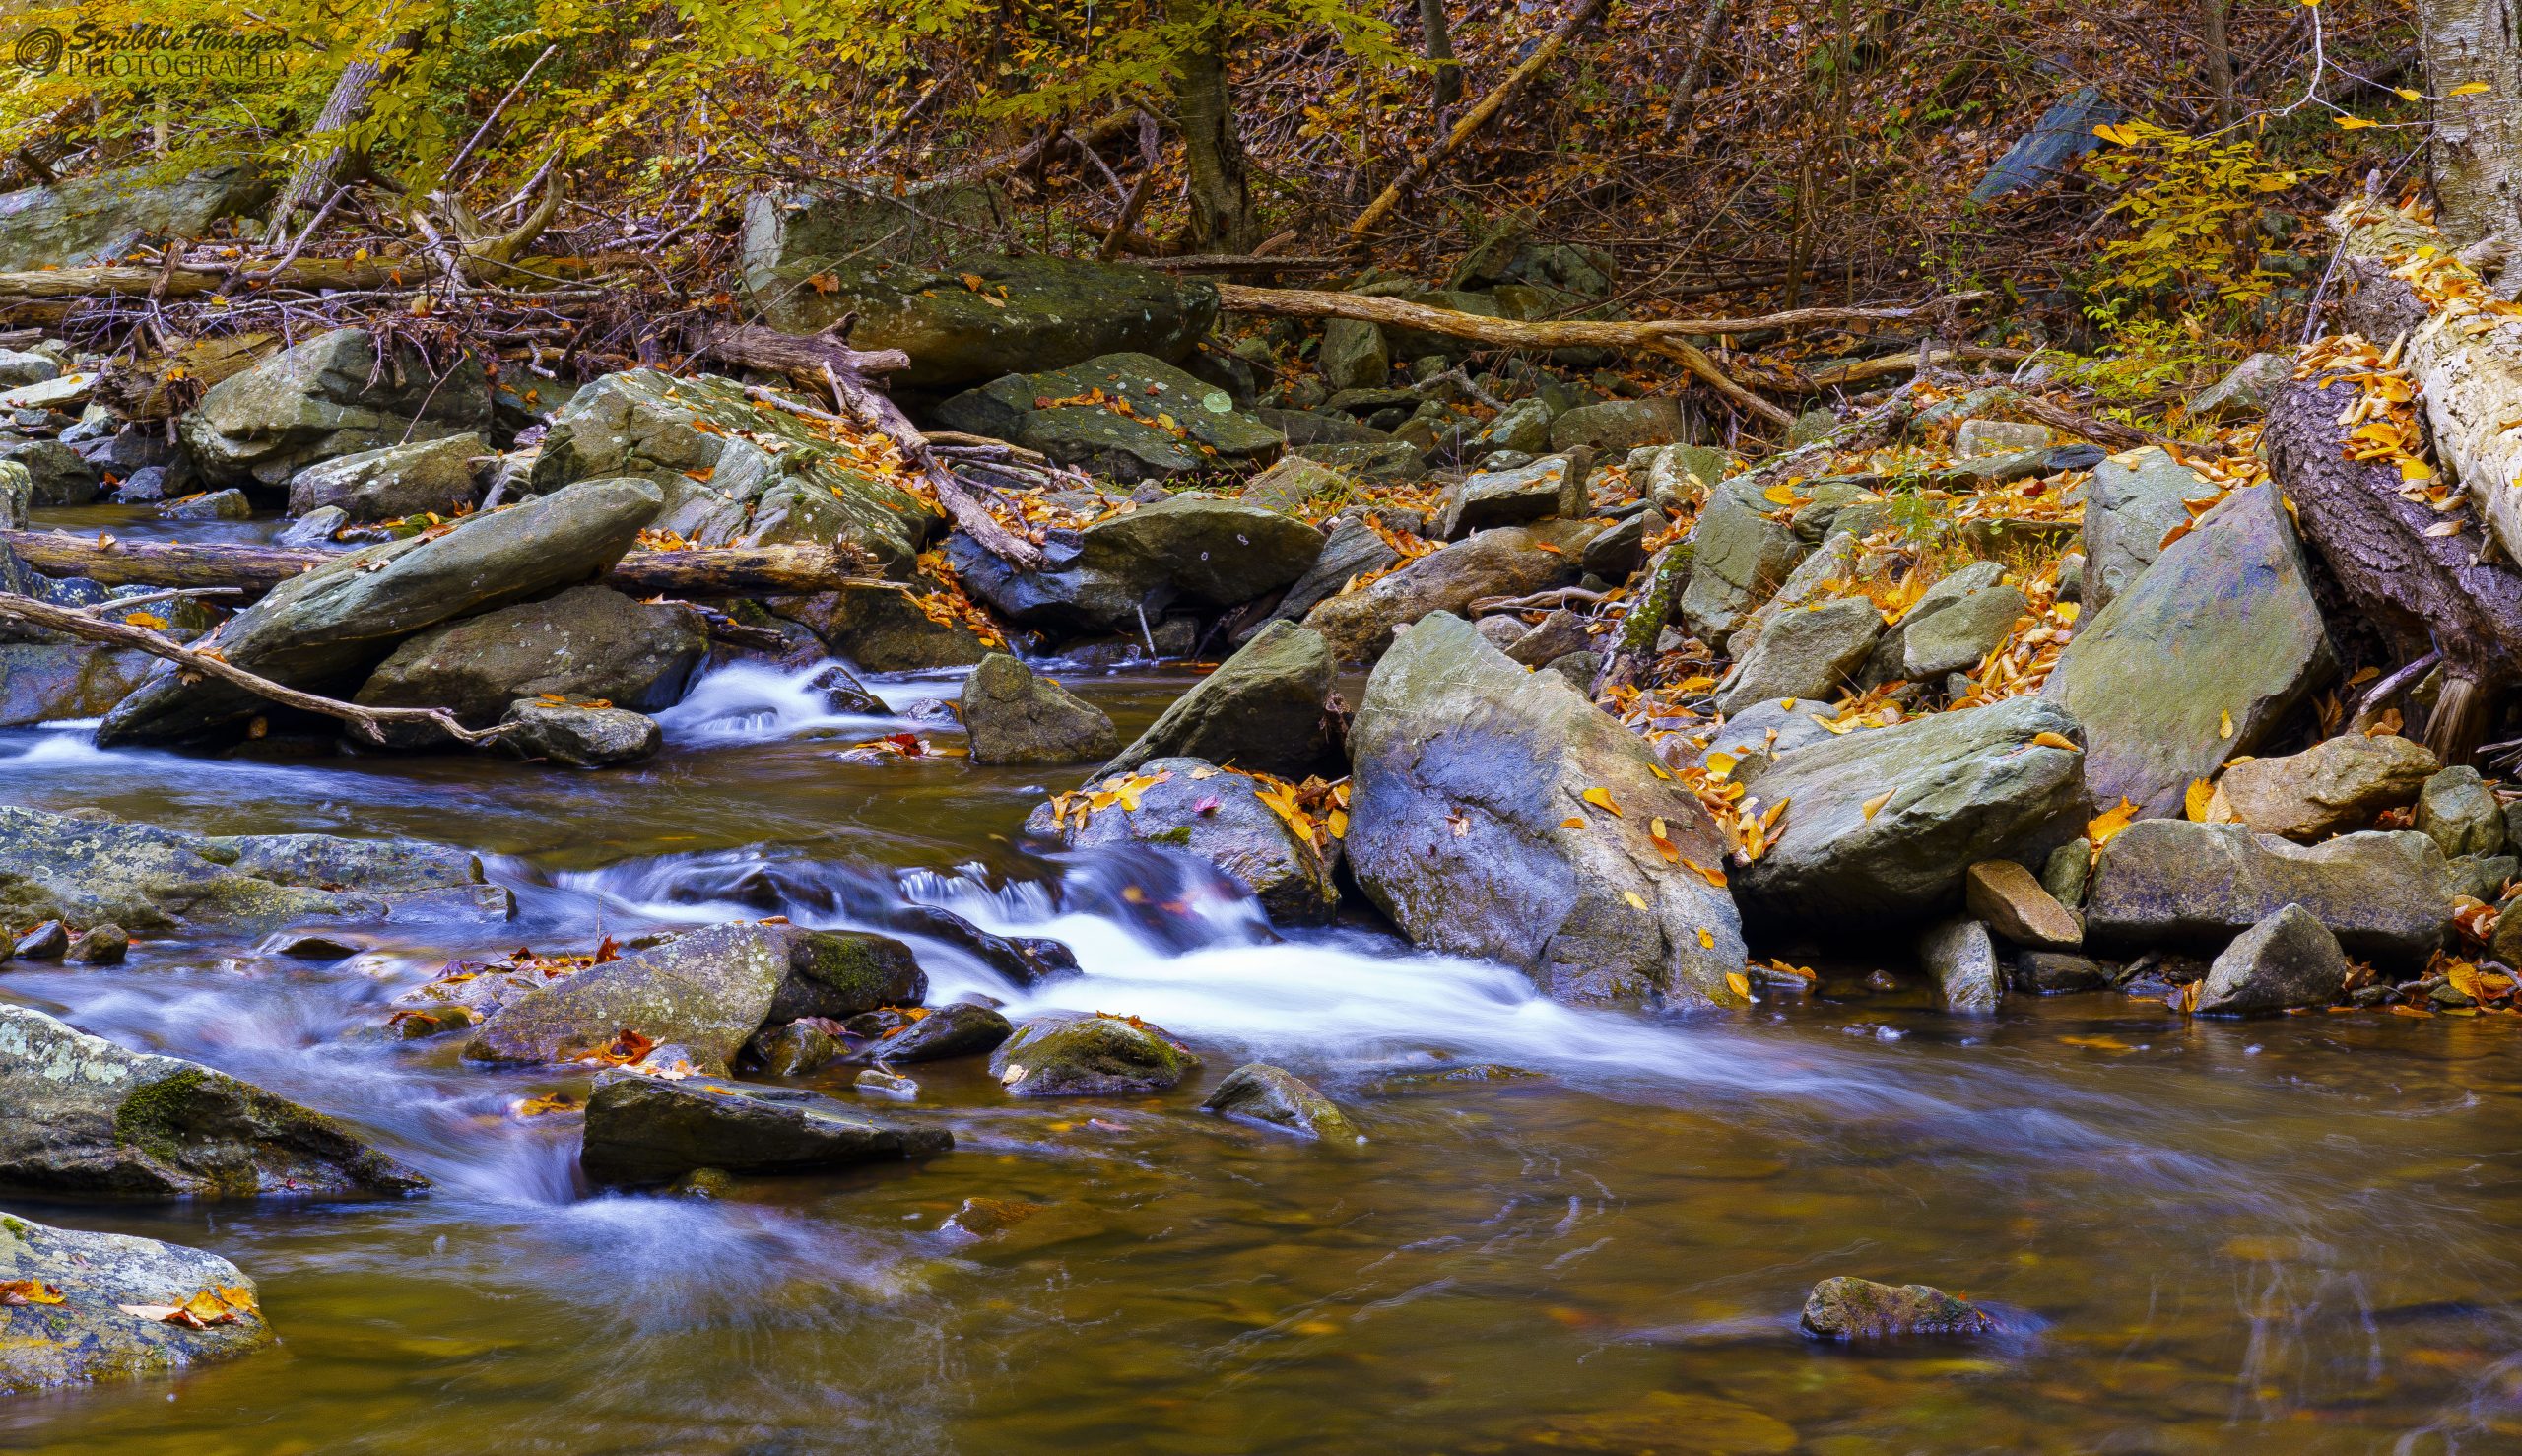 Big Hunting Creek, adjacent to Foxville Road, Catoctin Mountain Park